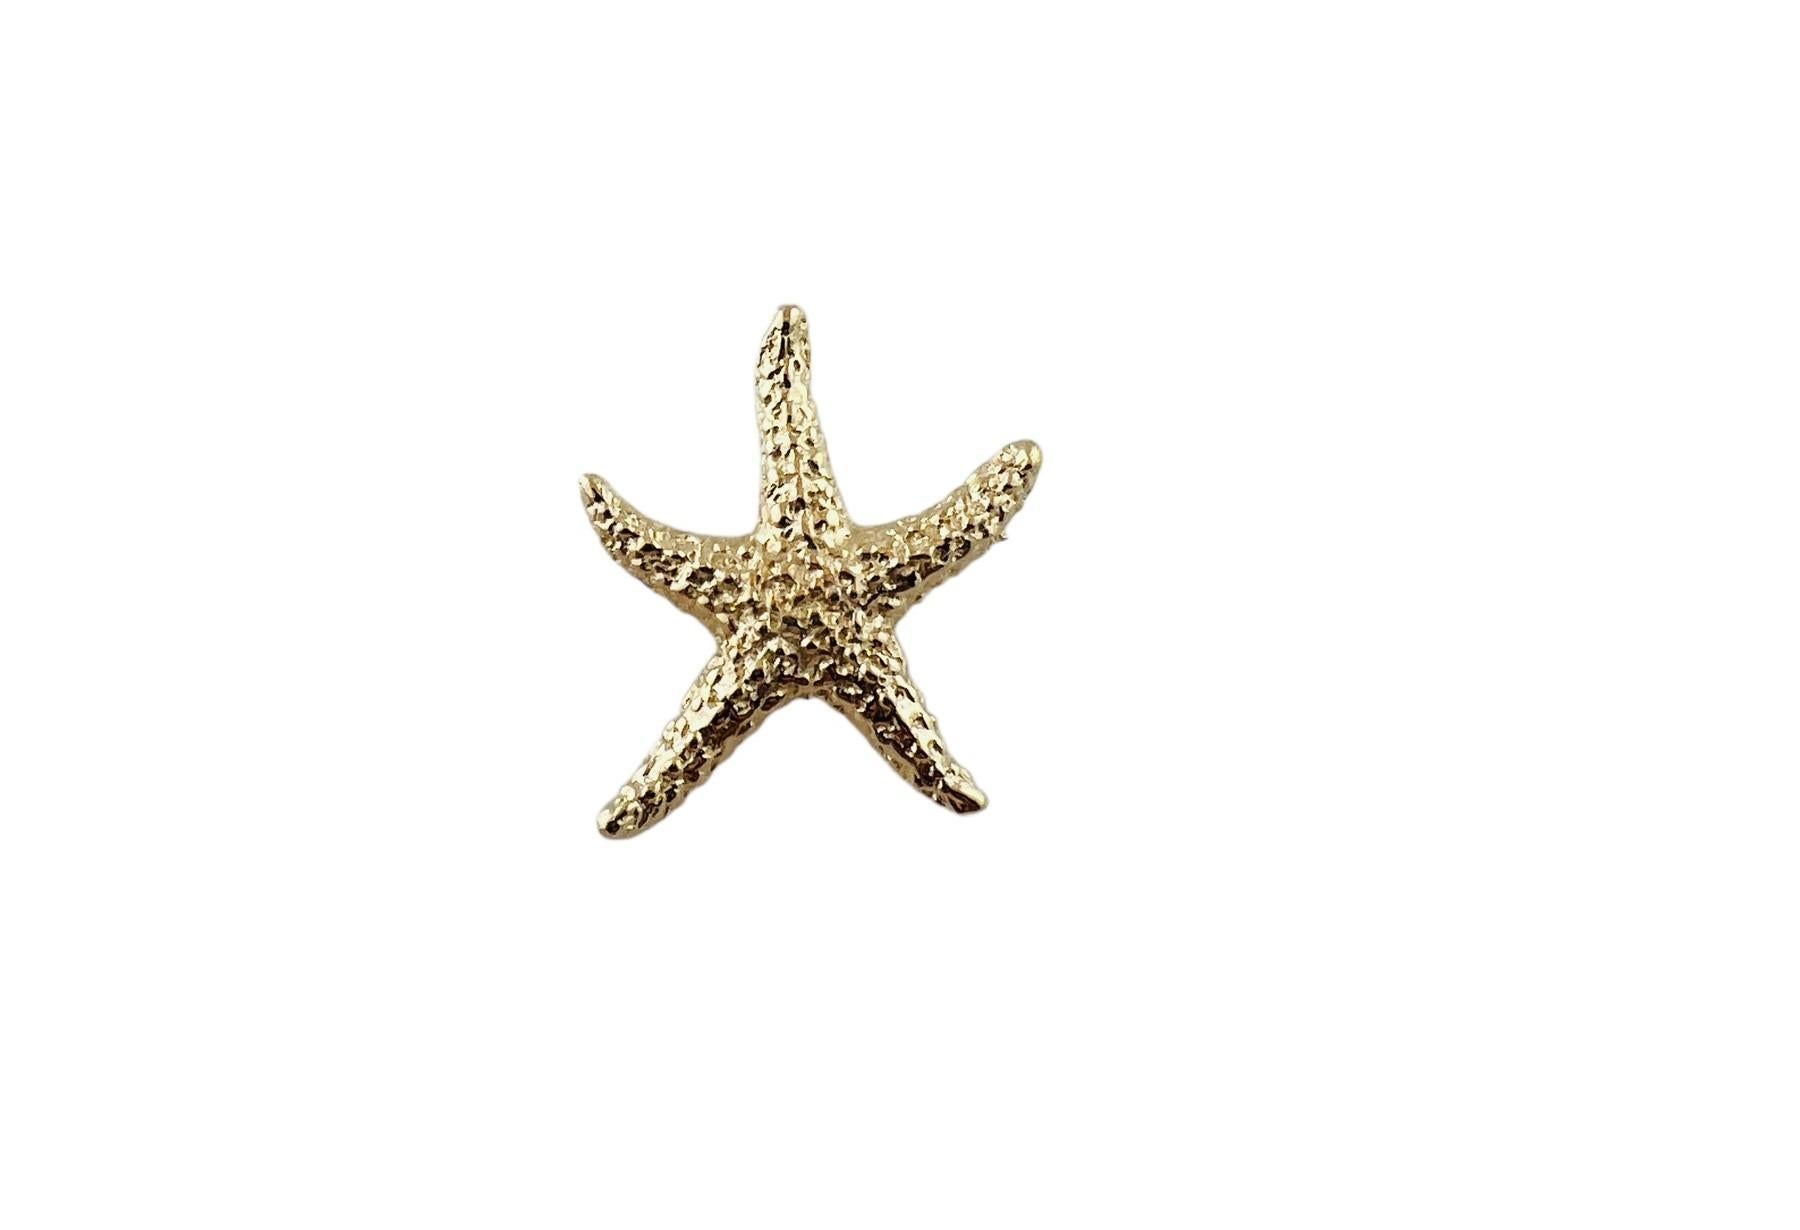 14K Yellow Gold Textured Starfish Pin #15554 For Sale 3